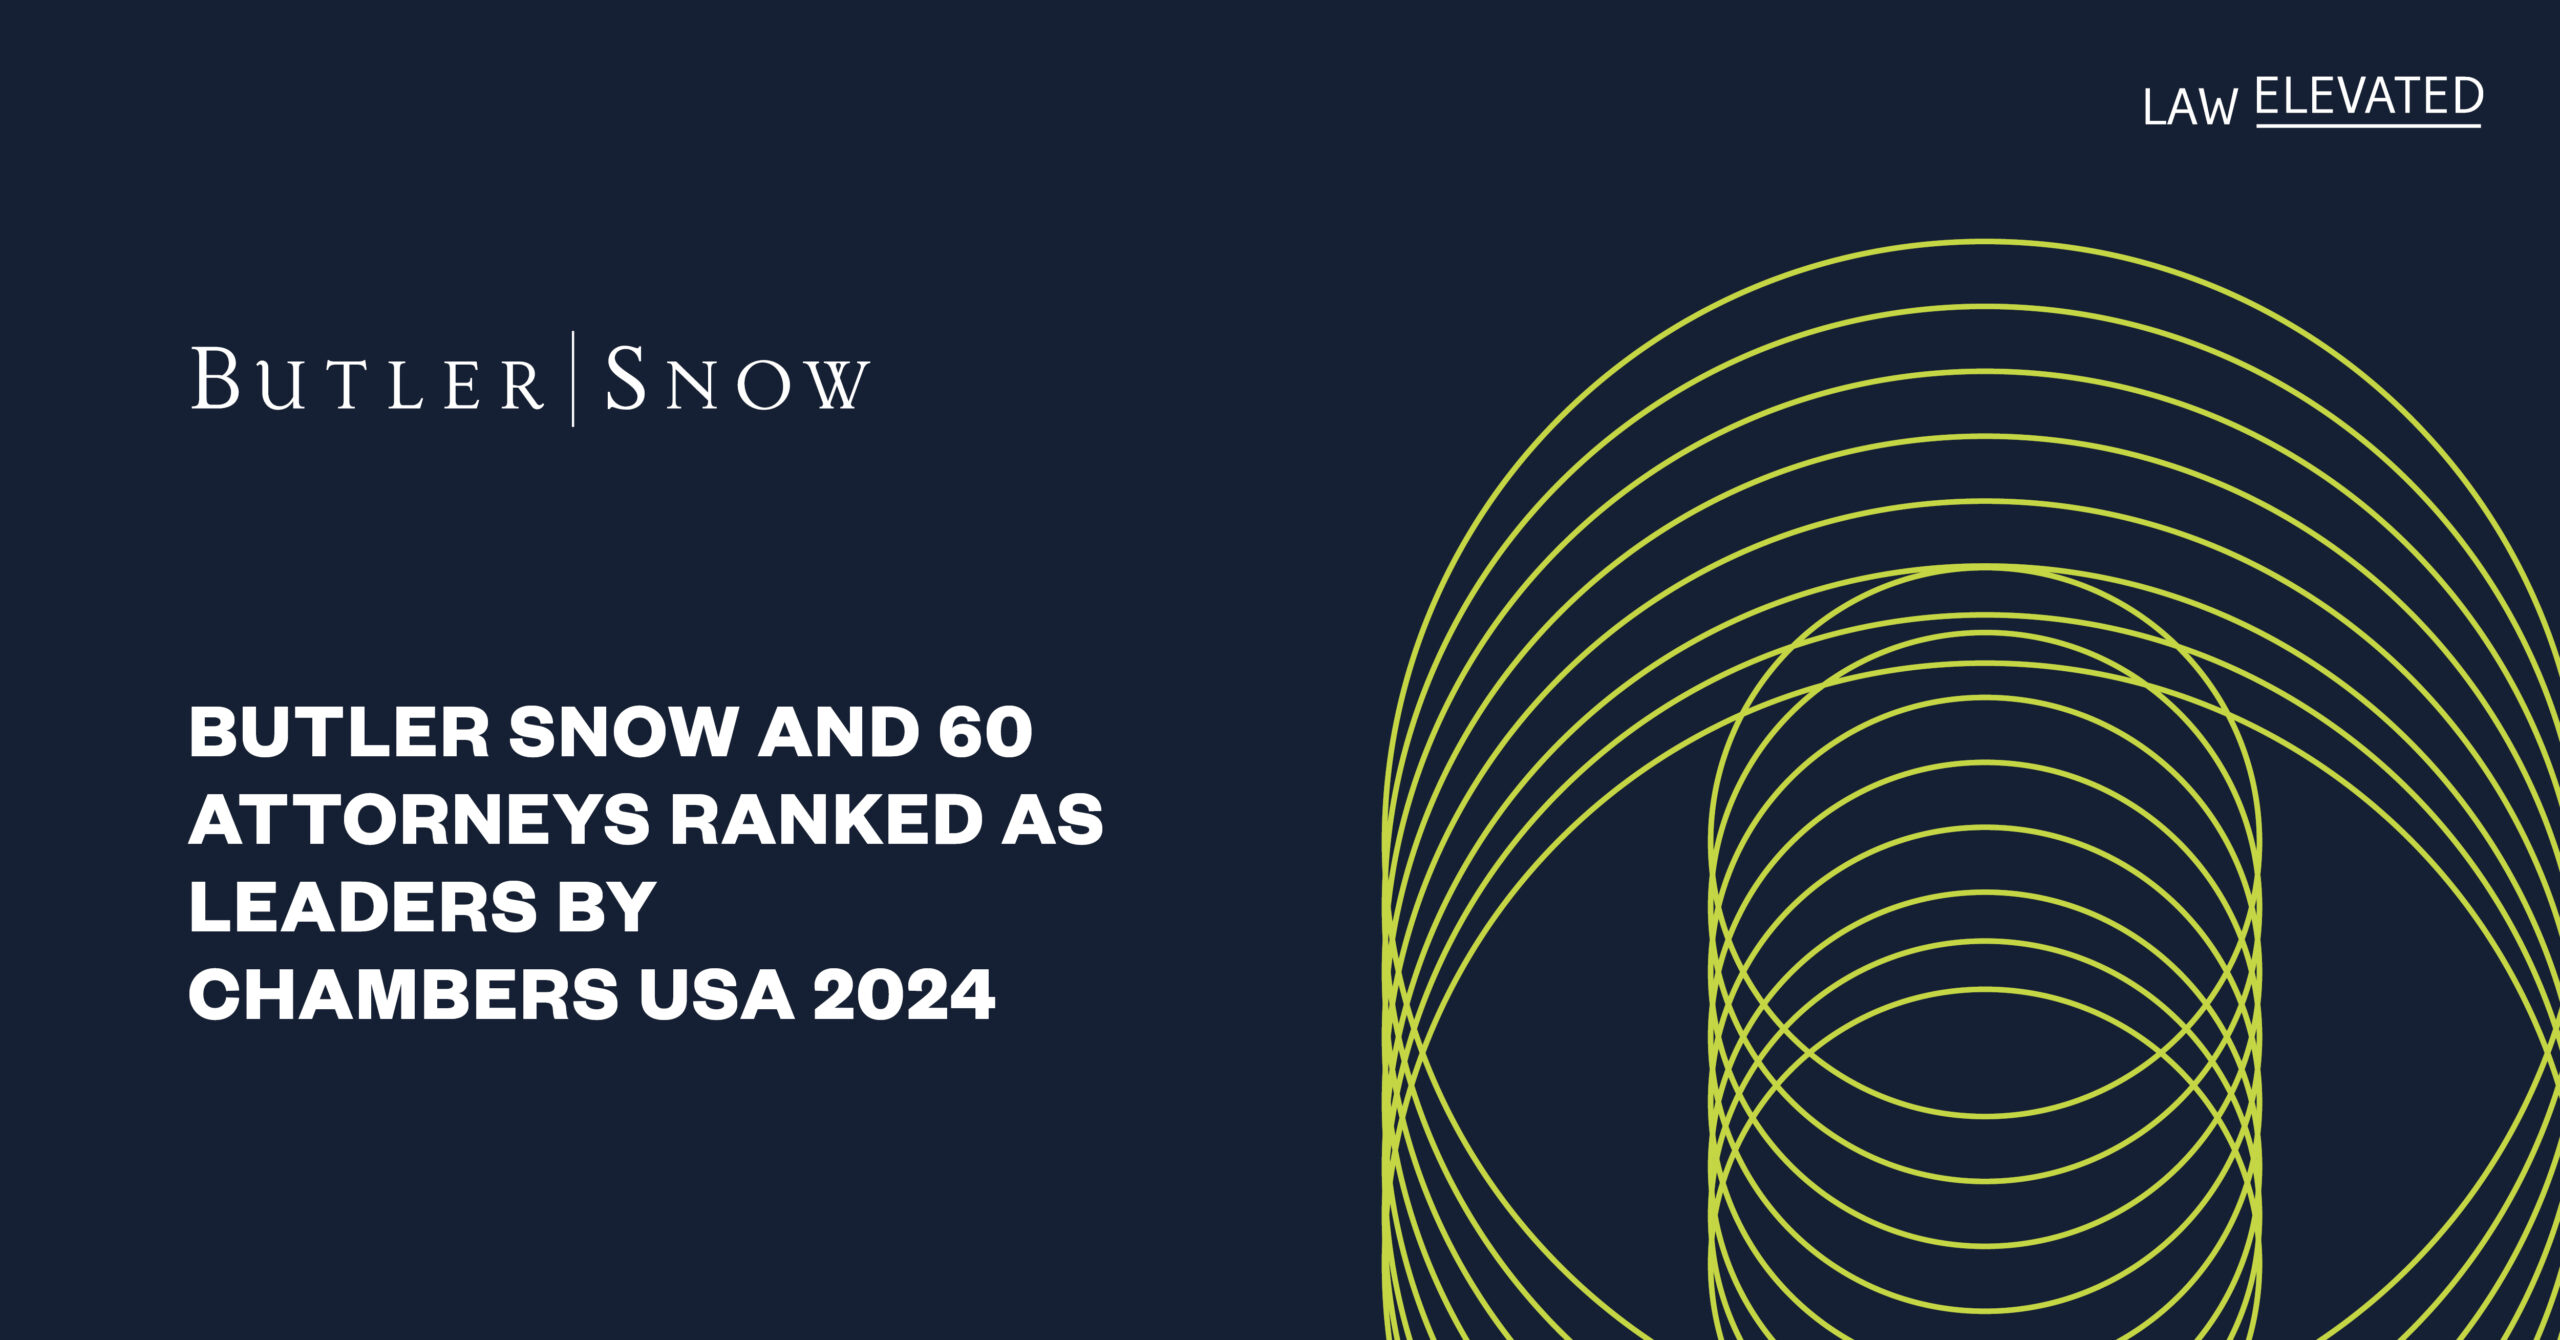 Butler Snow and 60 Attorneys Ranked as Leaders by Chambers USA 2024